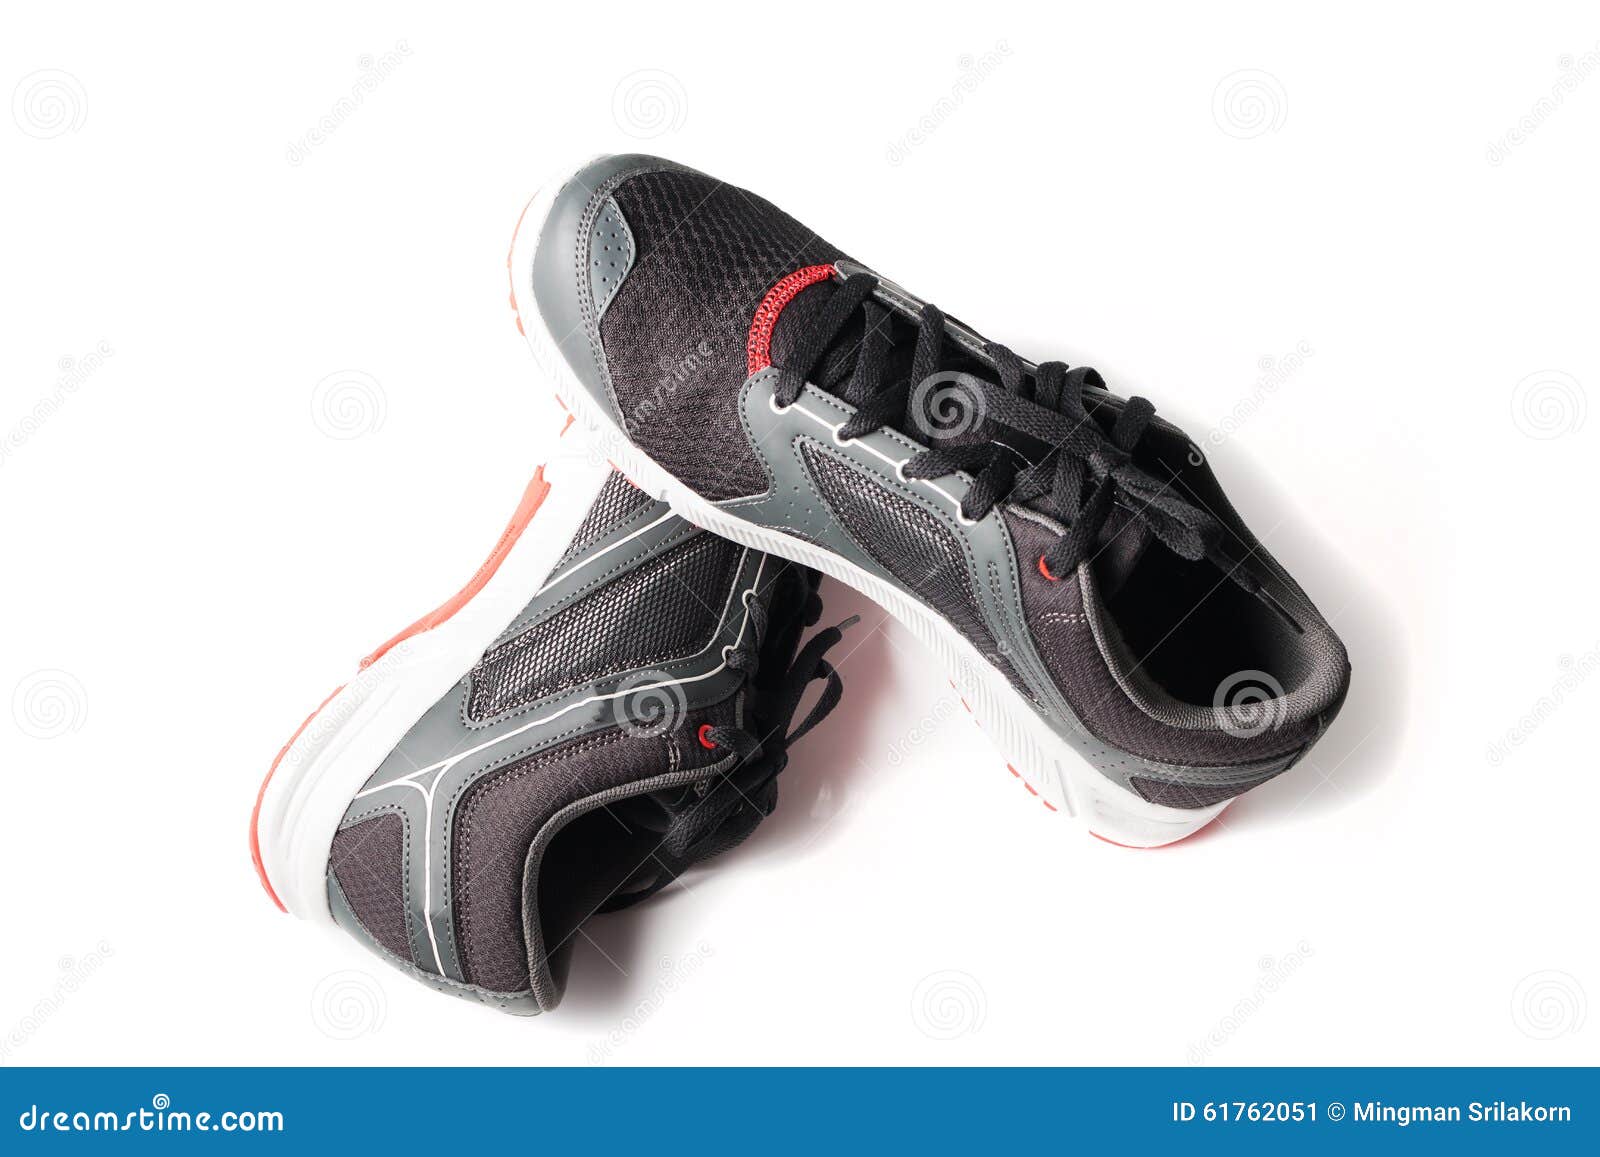 New Unbranded Running Shoe Color Black and Red Stock Image - Image of ...